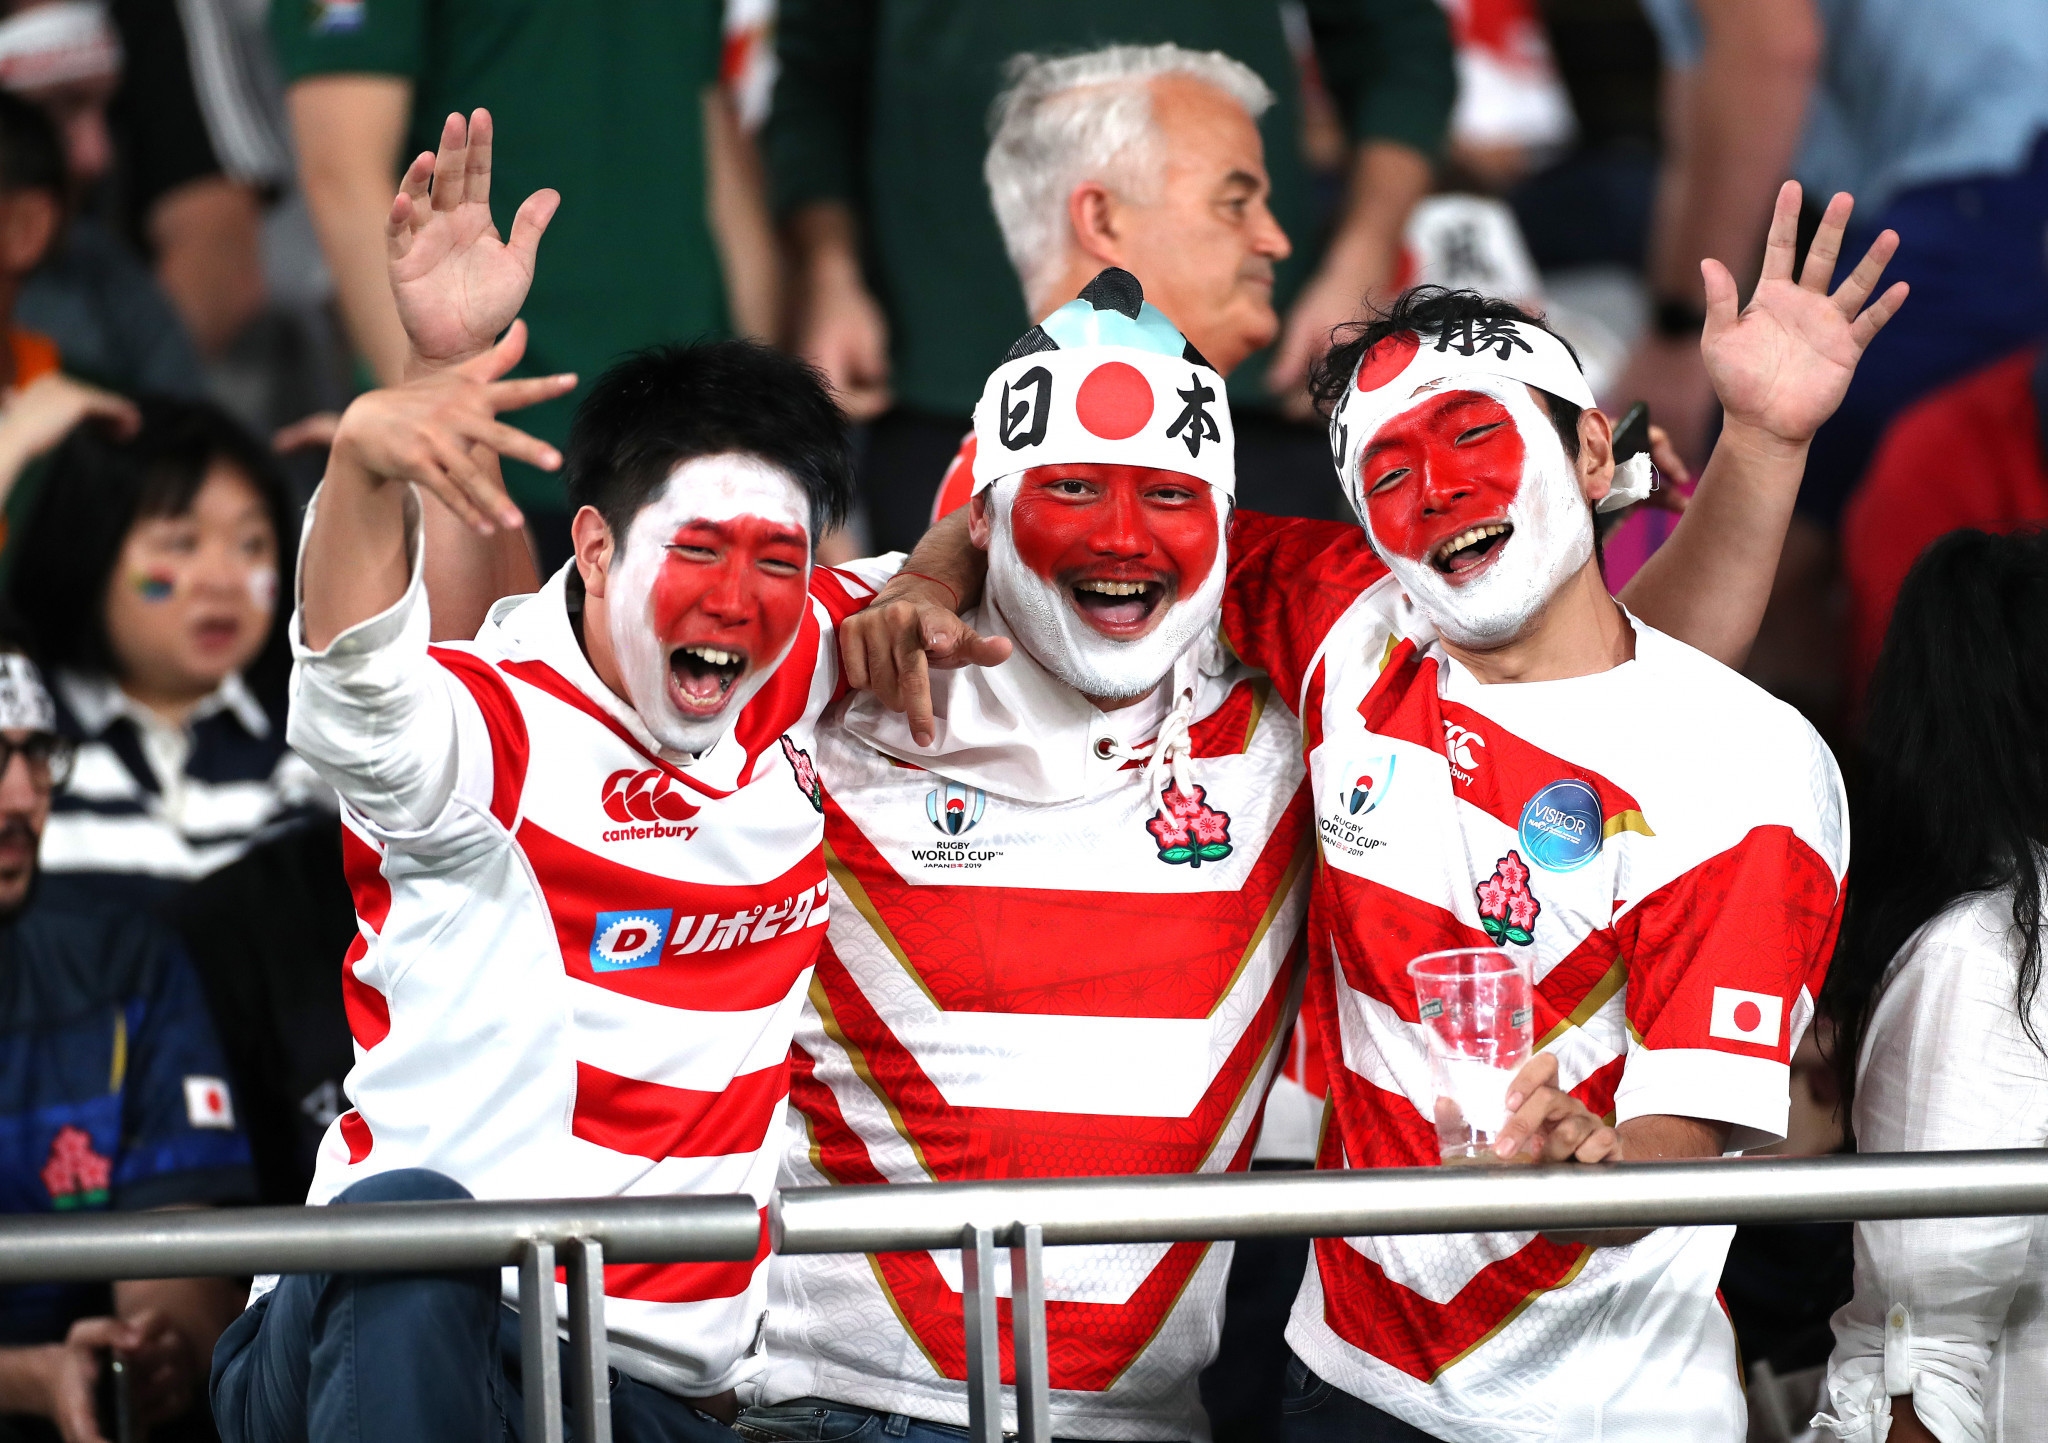 The Rugby World Cup has proved to be extremely popular in the host nation of Japan ©Getty Images